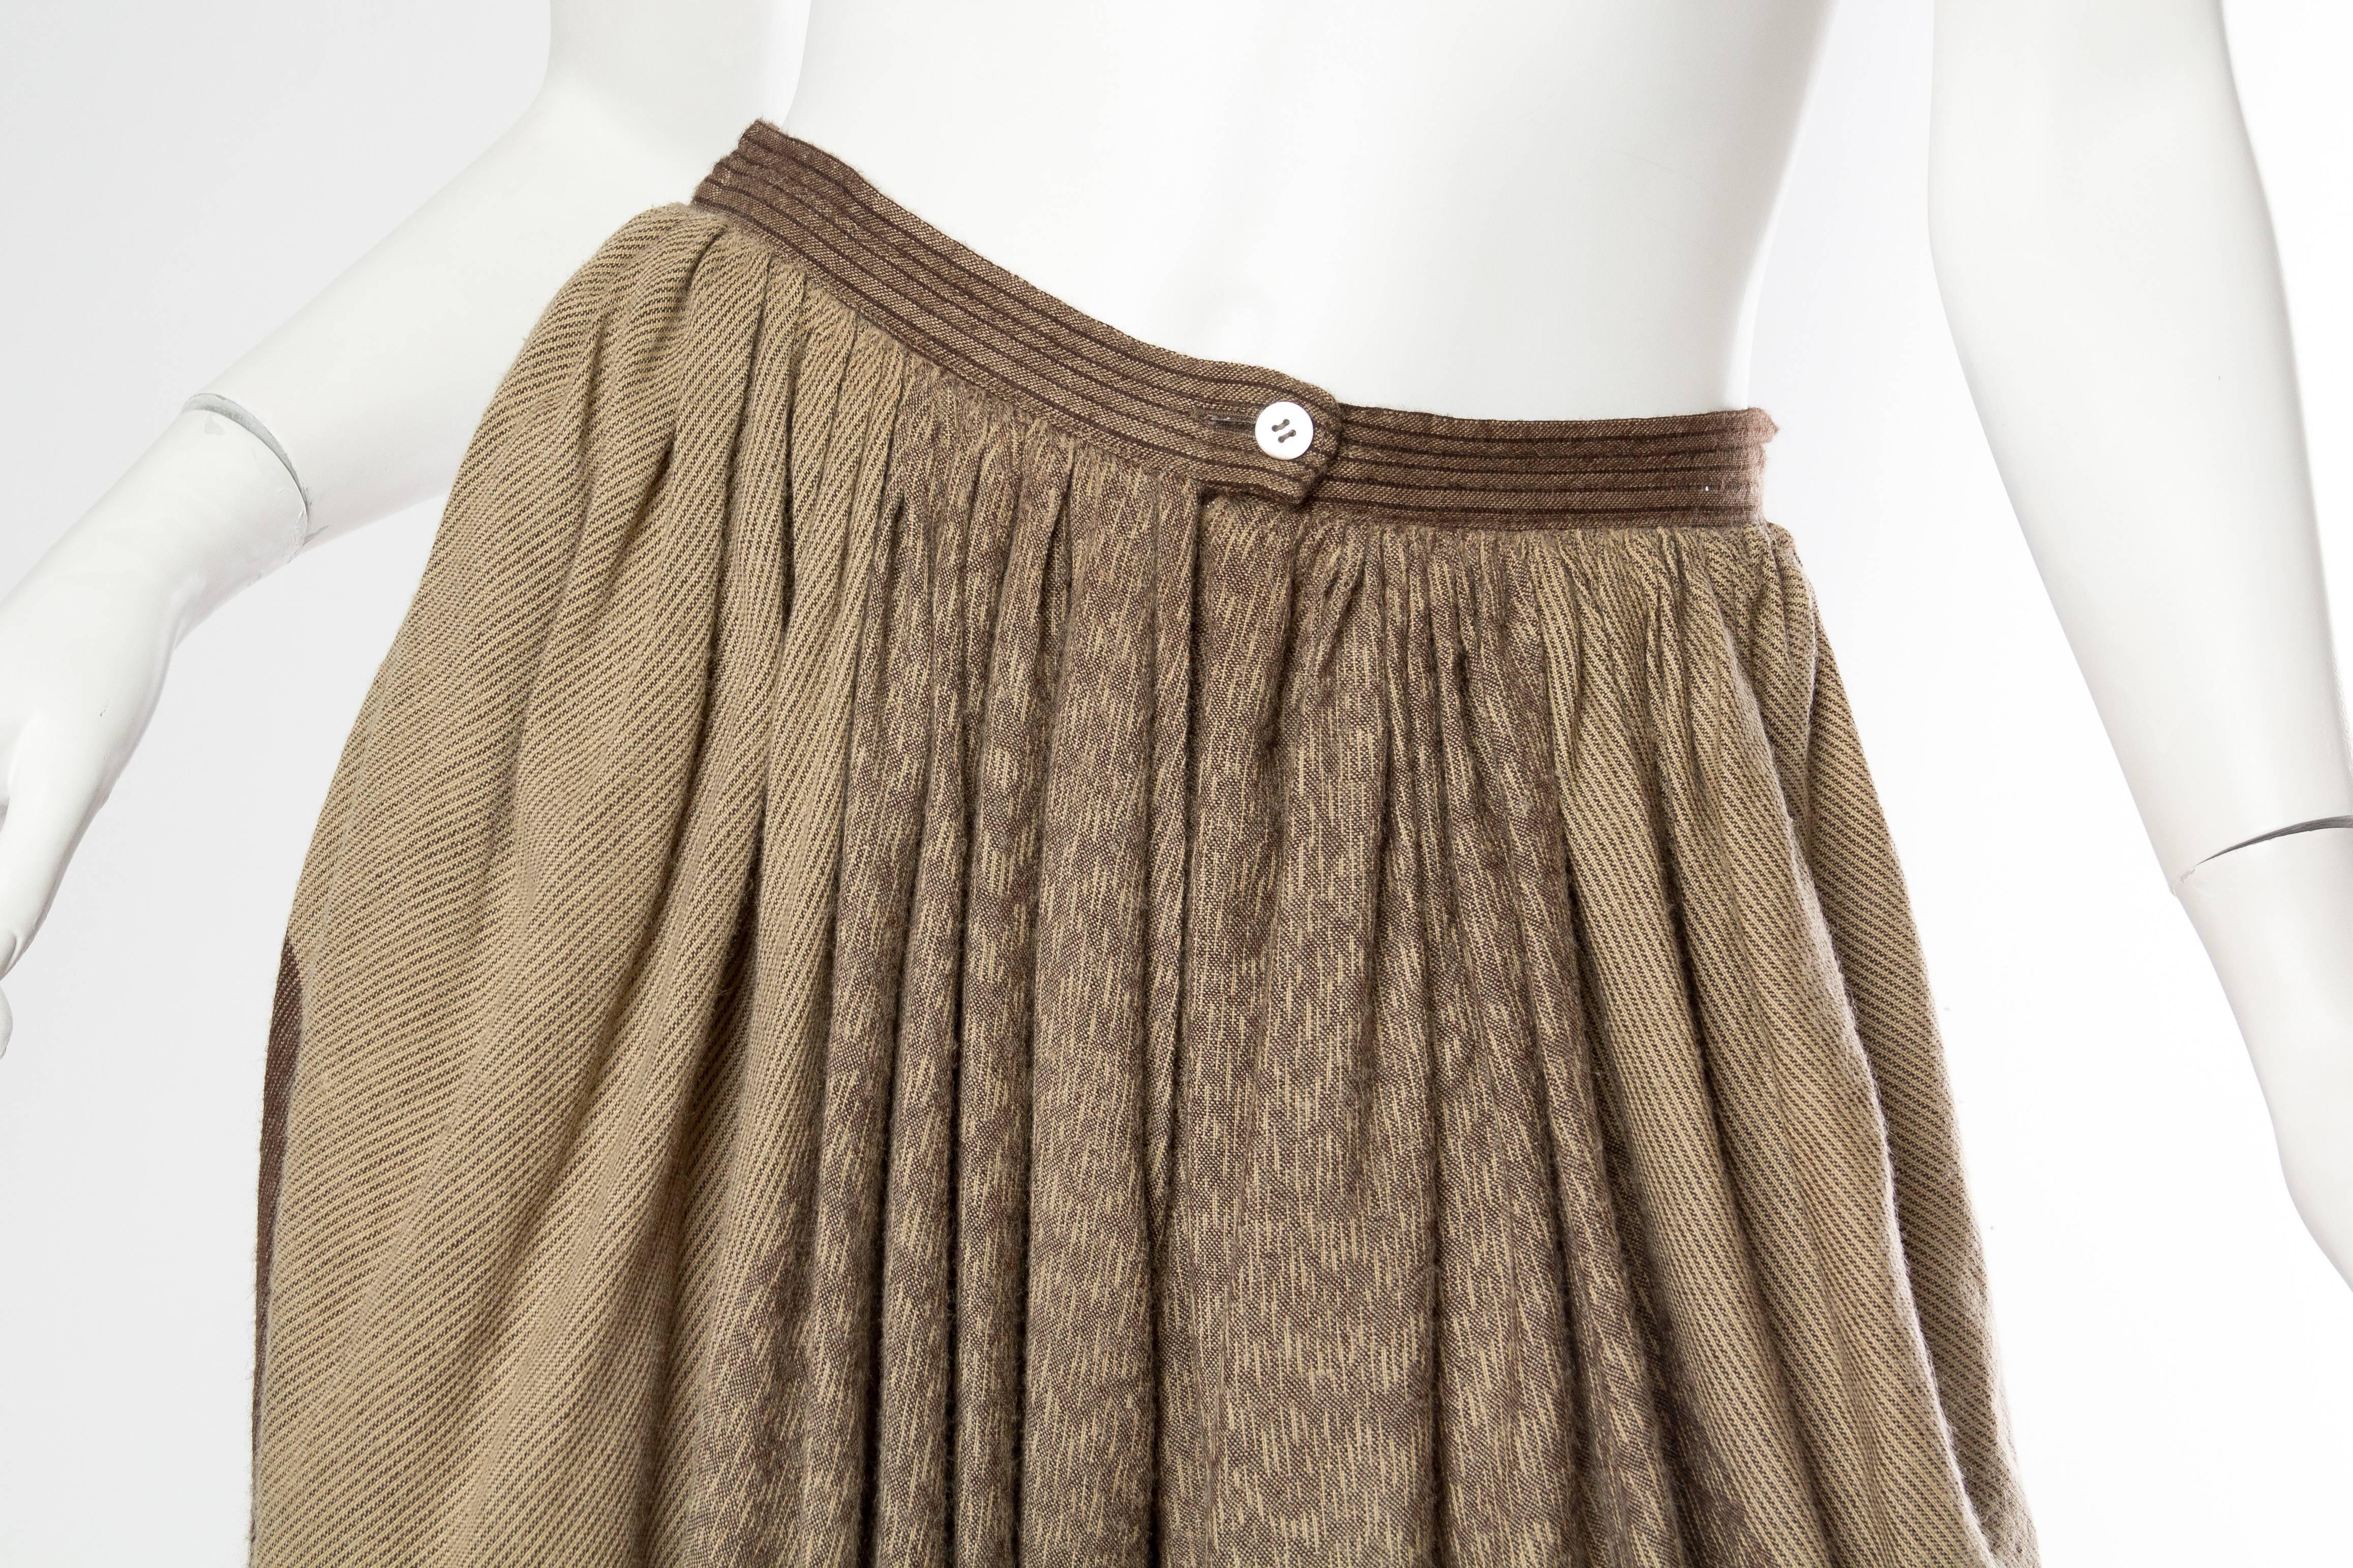 1980S ISSEY MIYAKE Tan & Brown Wool Blend Oversized Shirt Pleated Pants Ensemble In Excellent Condition For Sale In New York, NY